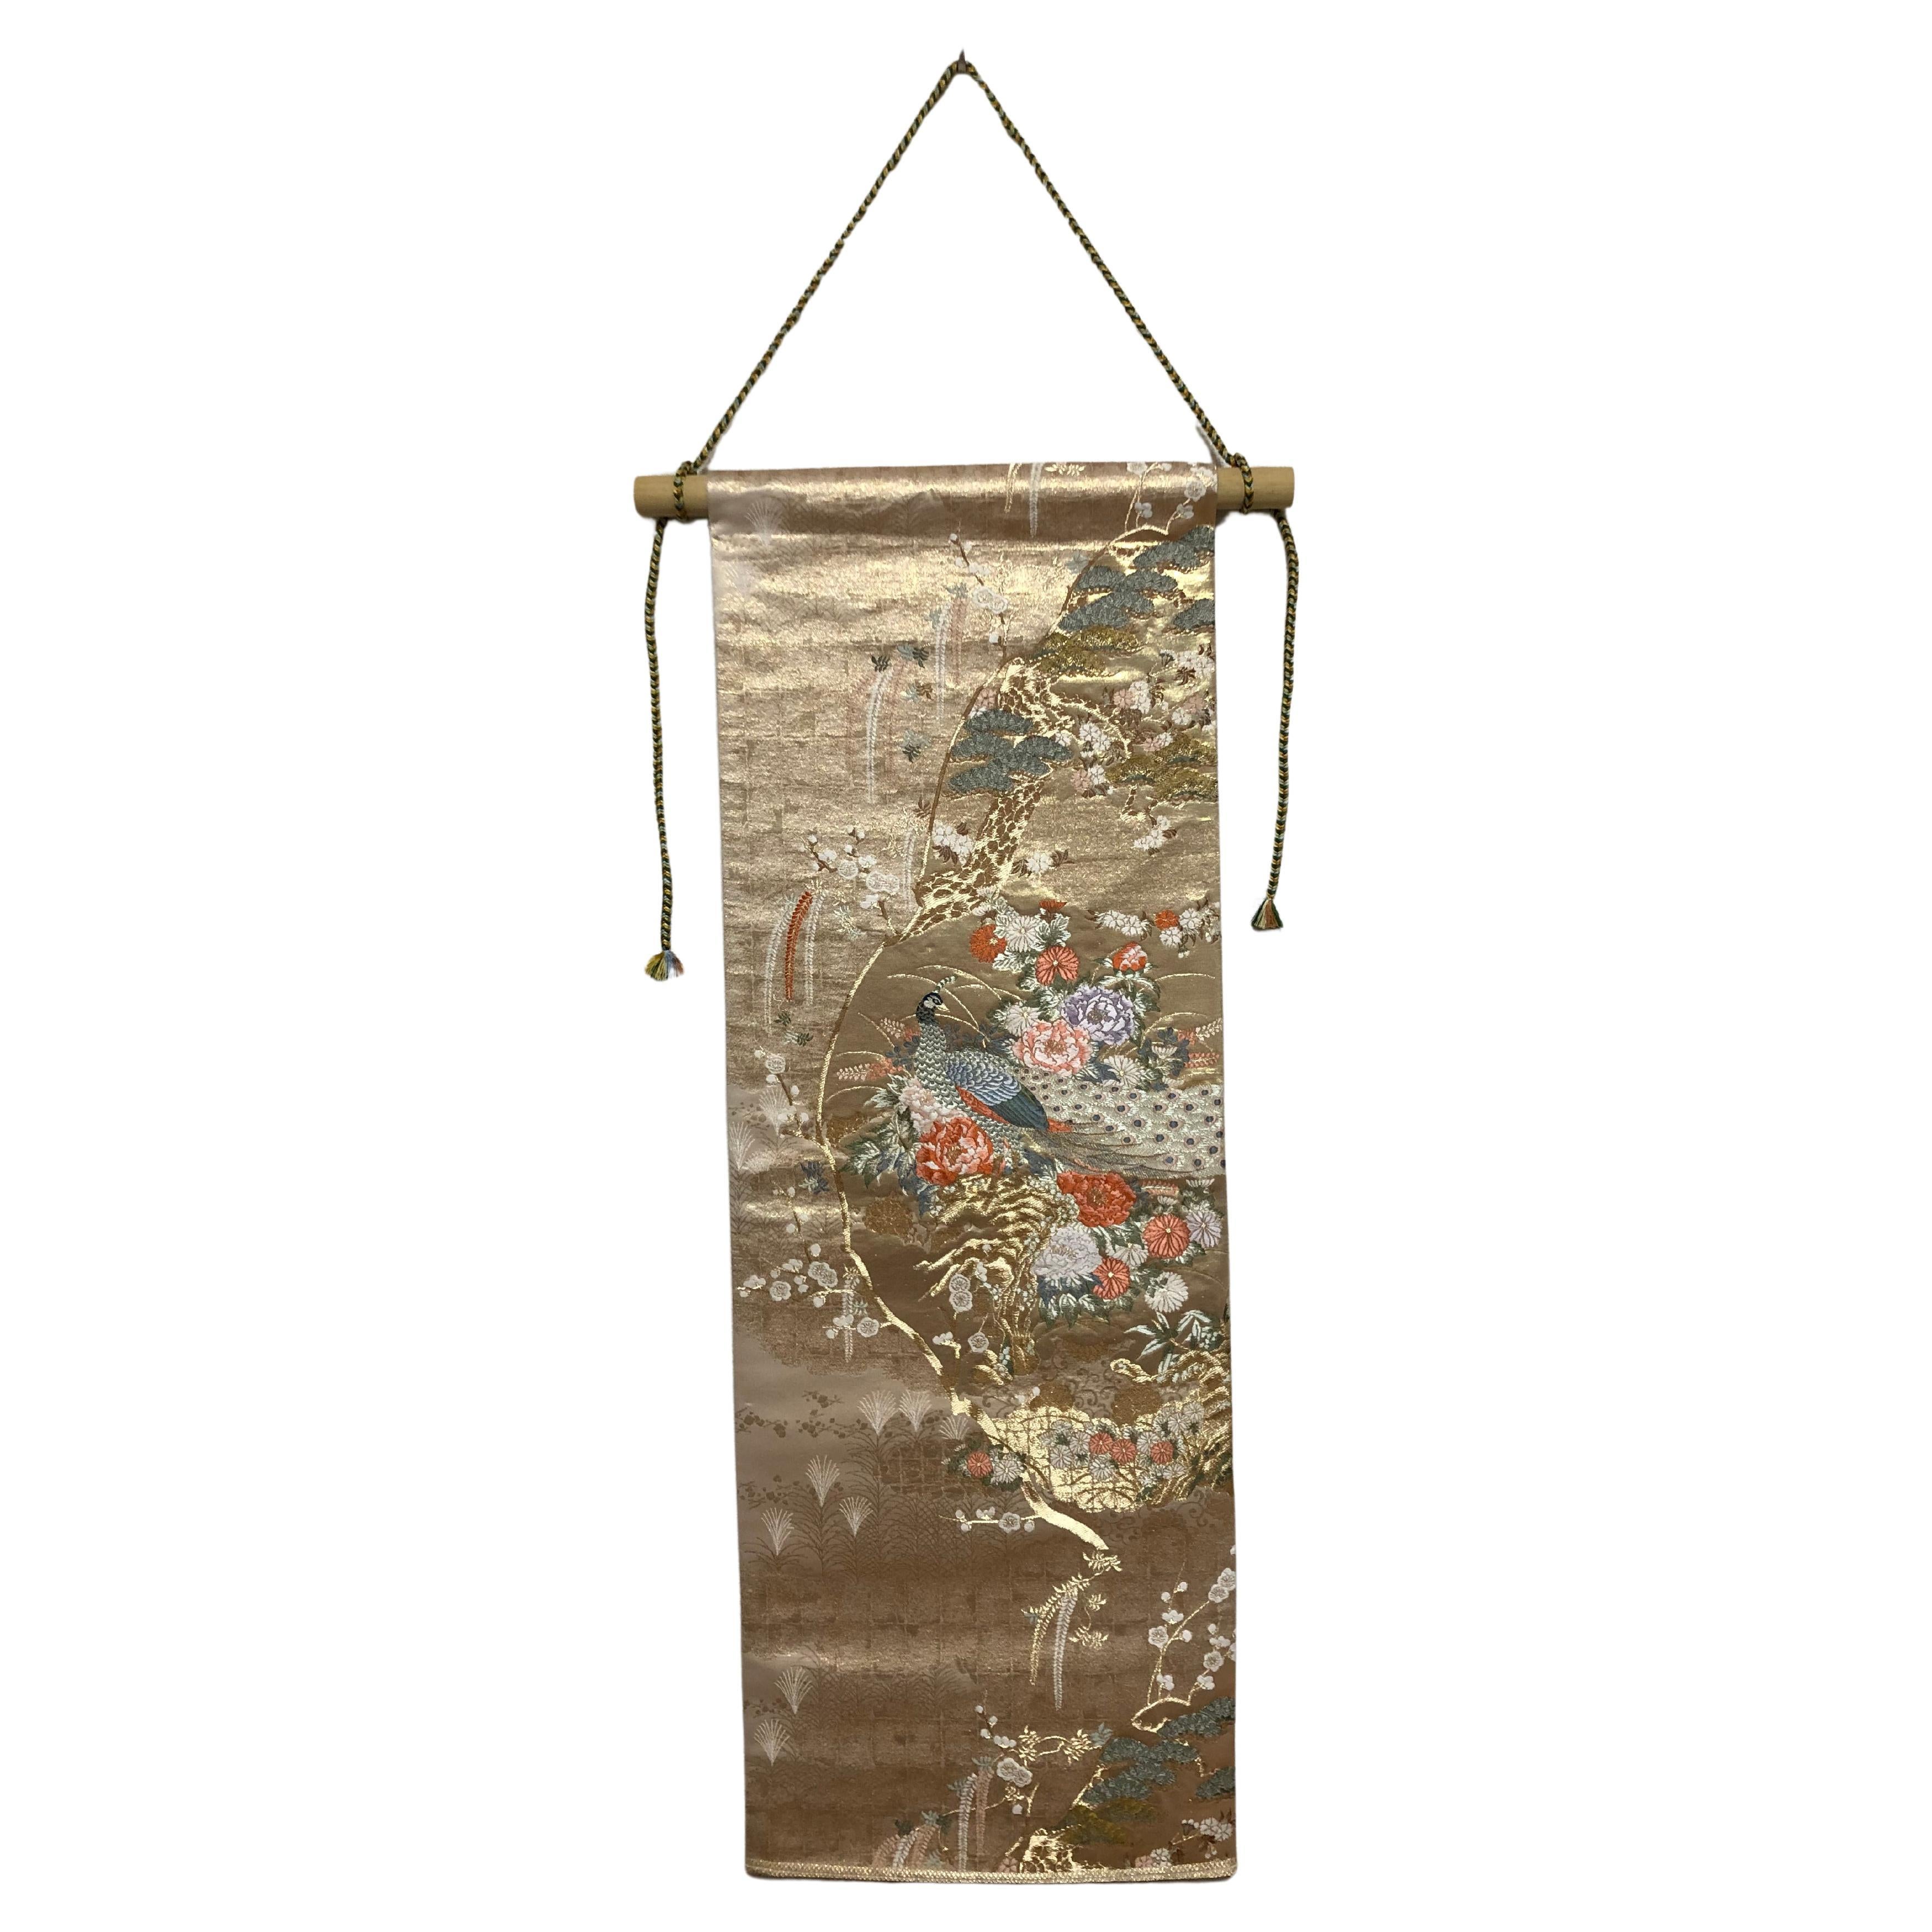 Kimono Tapestry “The Queen of Peacocks” , Japanese Art, Japanese Hanging Scroll